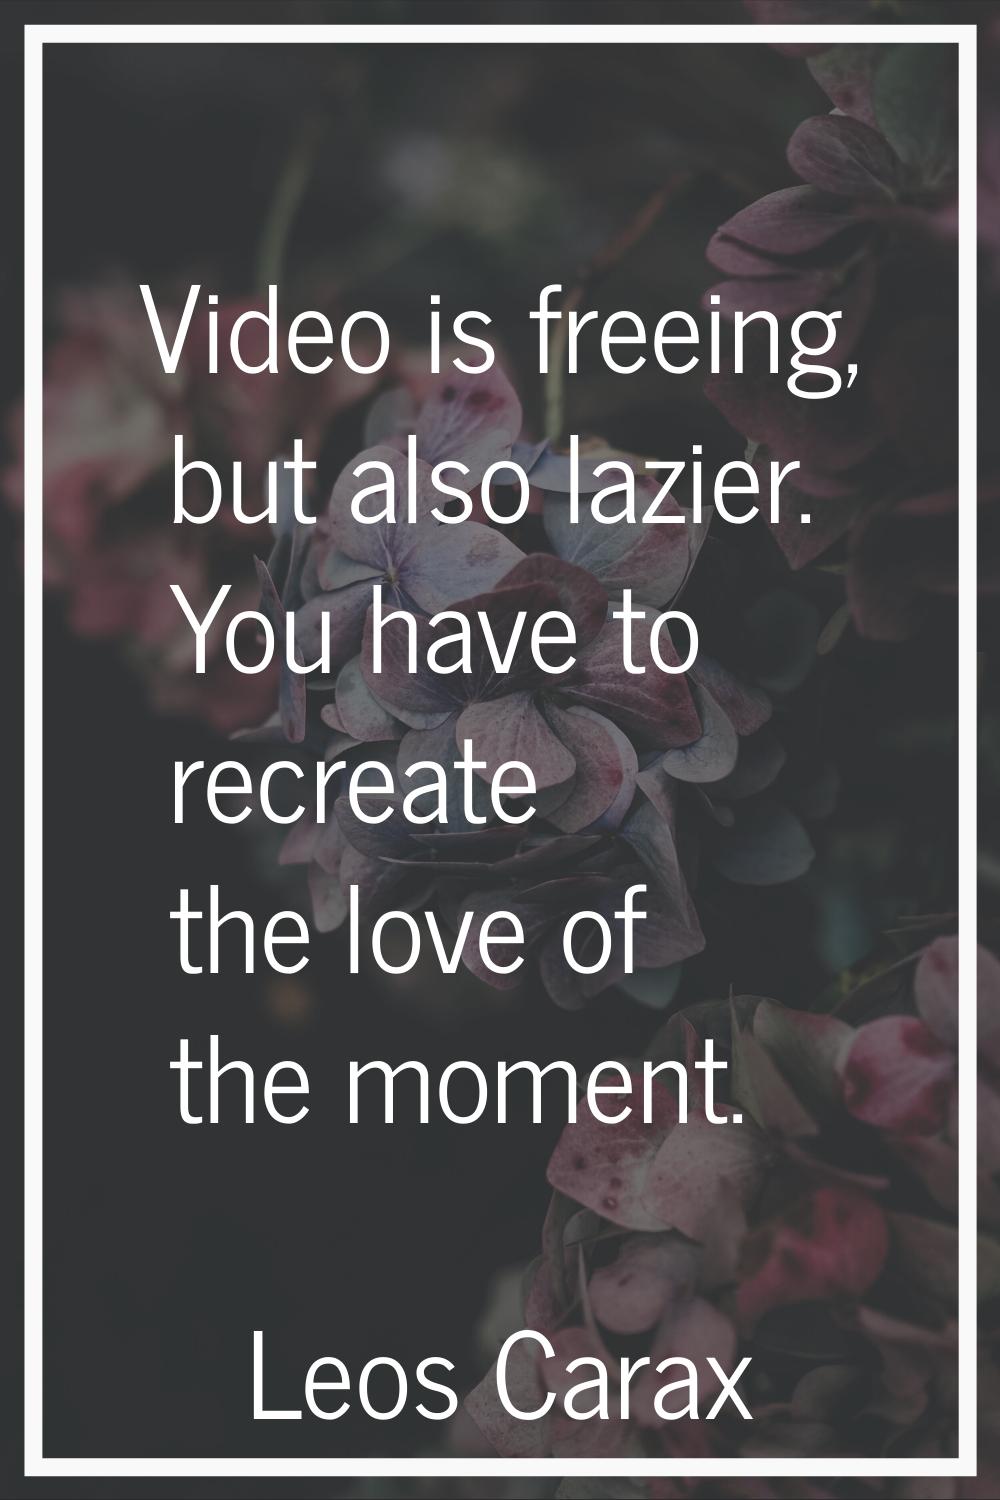 Video is freeing, but also lazier. You have to recreate the love of the moment.